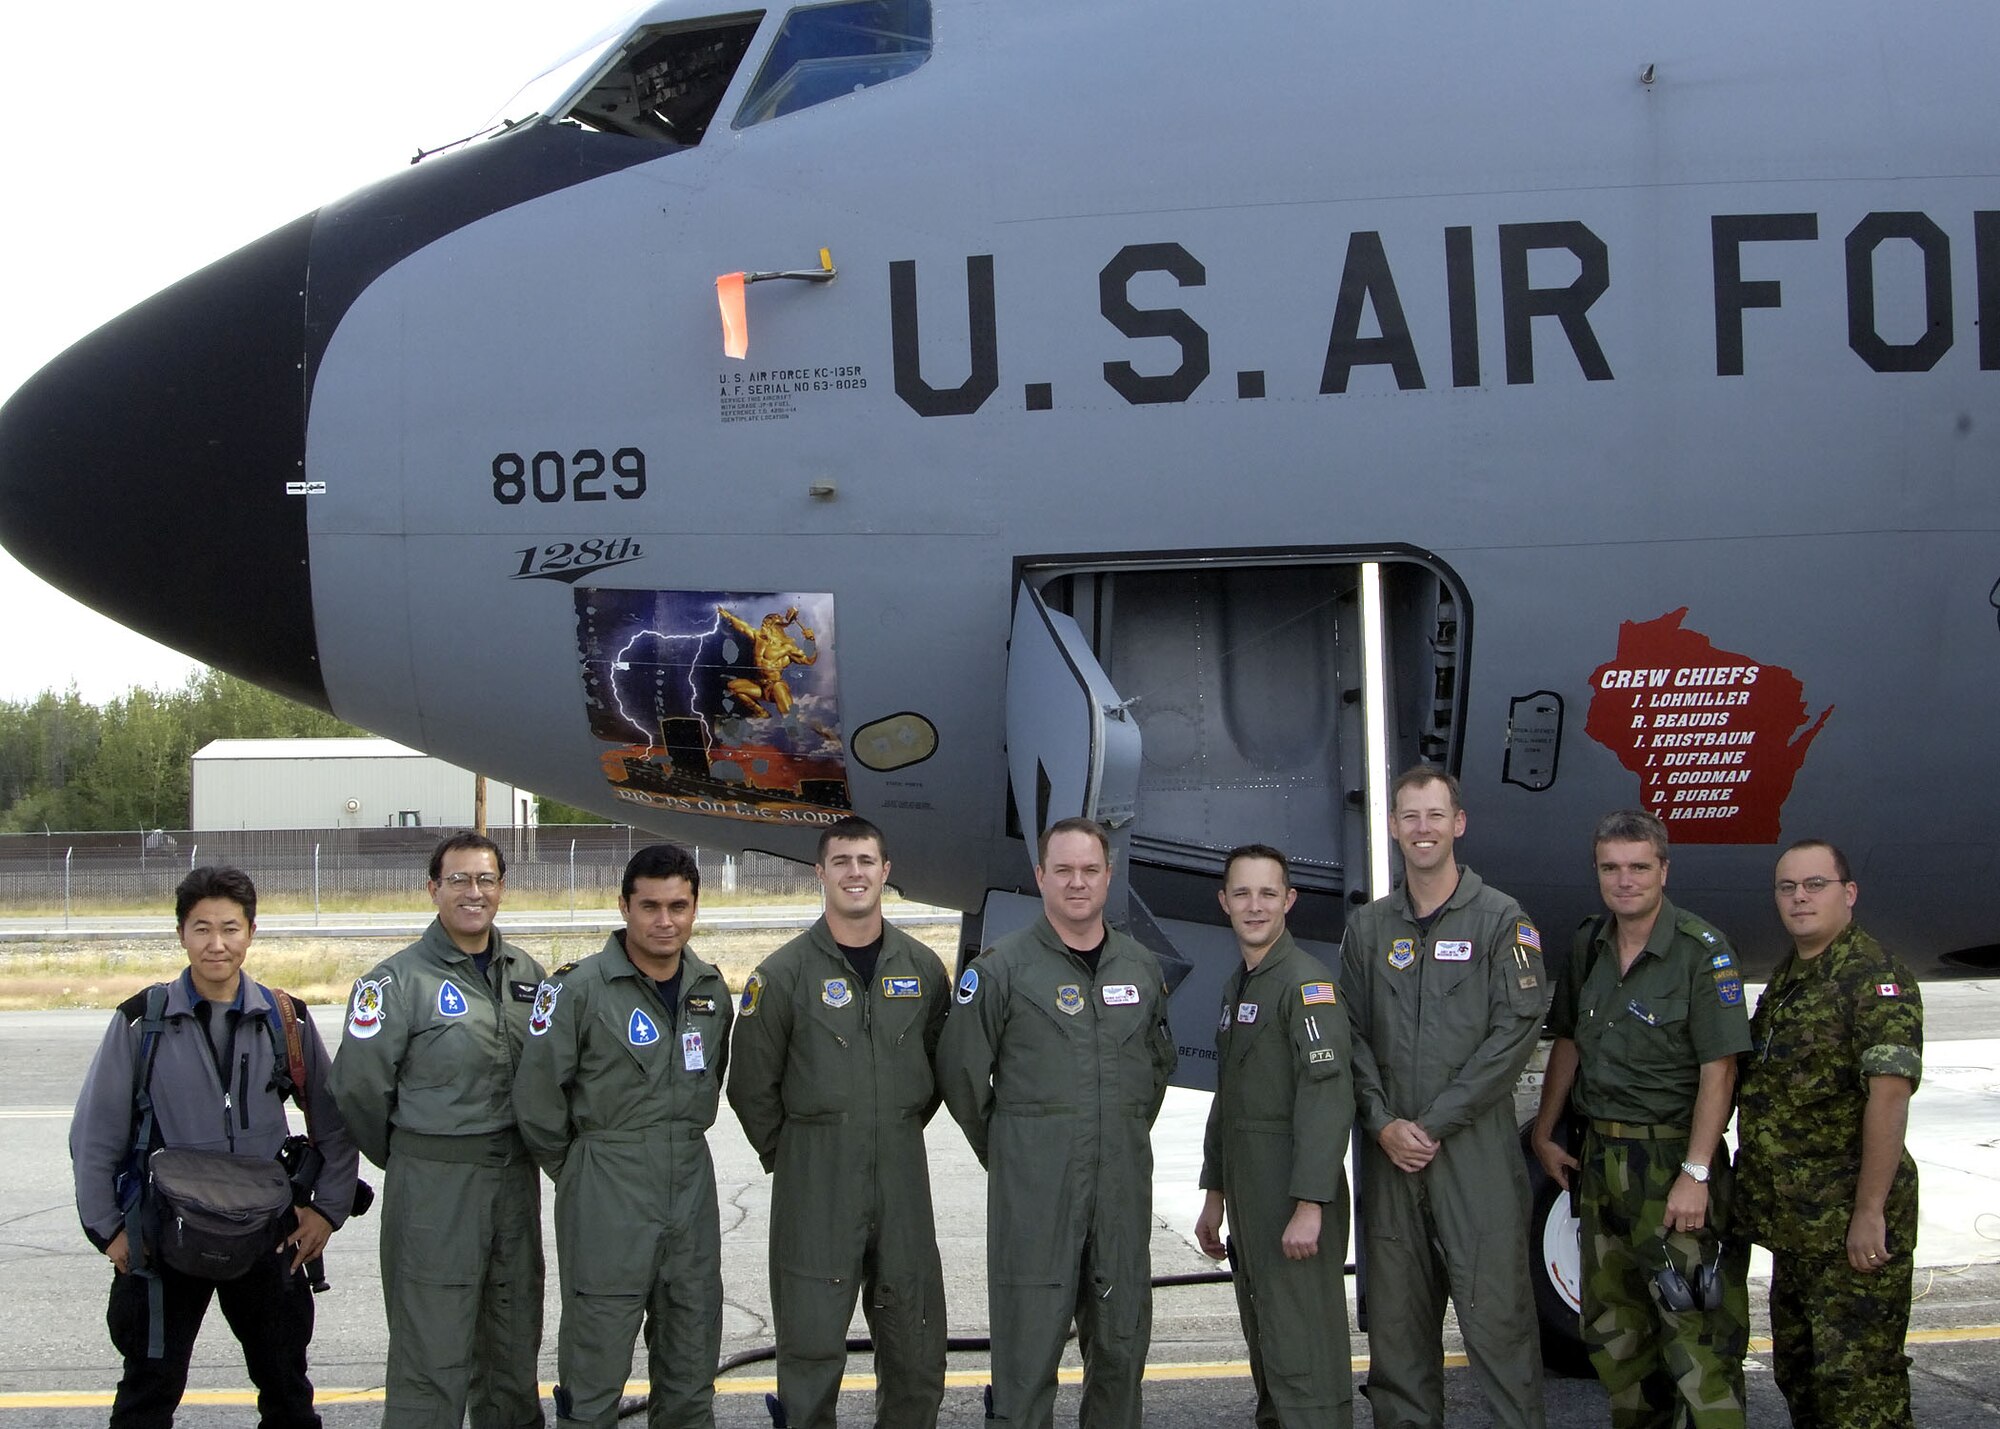 EIELSON AIR FORCE BASE, Alaska - Koji Nakano, Captain Gerard de Jesus Navarro Manon, Lieutenant Colonel Jose Antonio Sierra Amador, Tech Sergeant (TSgt) Keith Rownan, Major Shawn Gasney, Captain Andy Wahl, TSgt Chris Winchell First Lieutenant Peter Liander, and Corporal Jon Wilson after a familiarization flight at Excersise Cooperative Cope Thunder 06-3 (CCT06-3). Photo by Major Eric Hilliard, Excersise COOPERATIVE COPE THUNDER 06-3 Public Affairs

